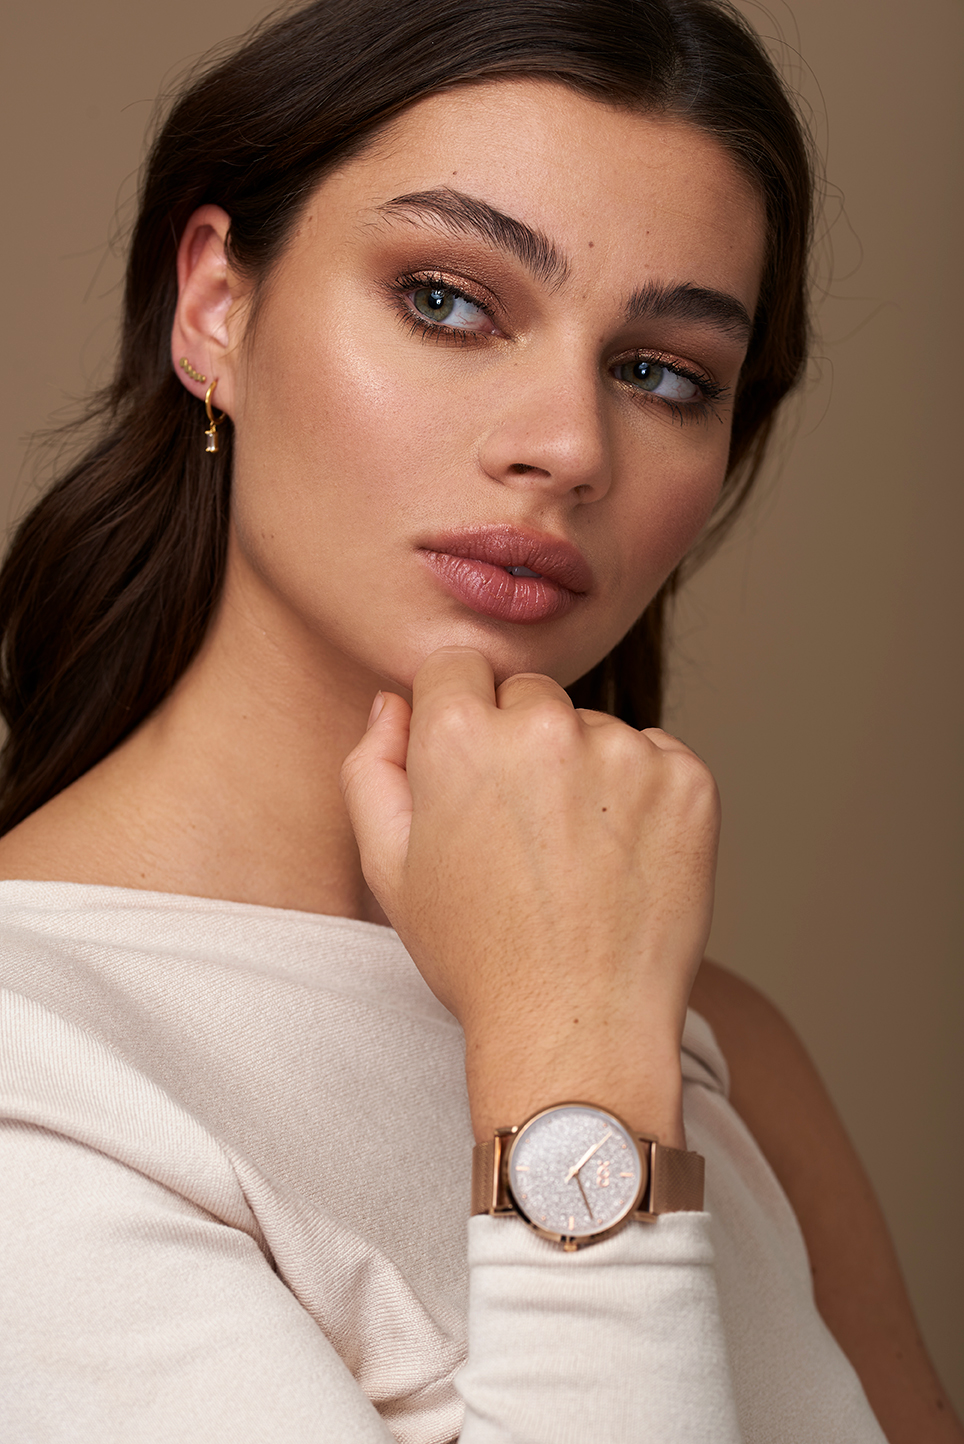 Model on a beige background with darker hair, holding her hand close to her face to showcase her watch.